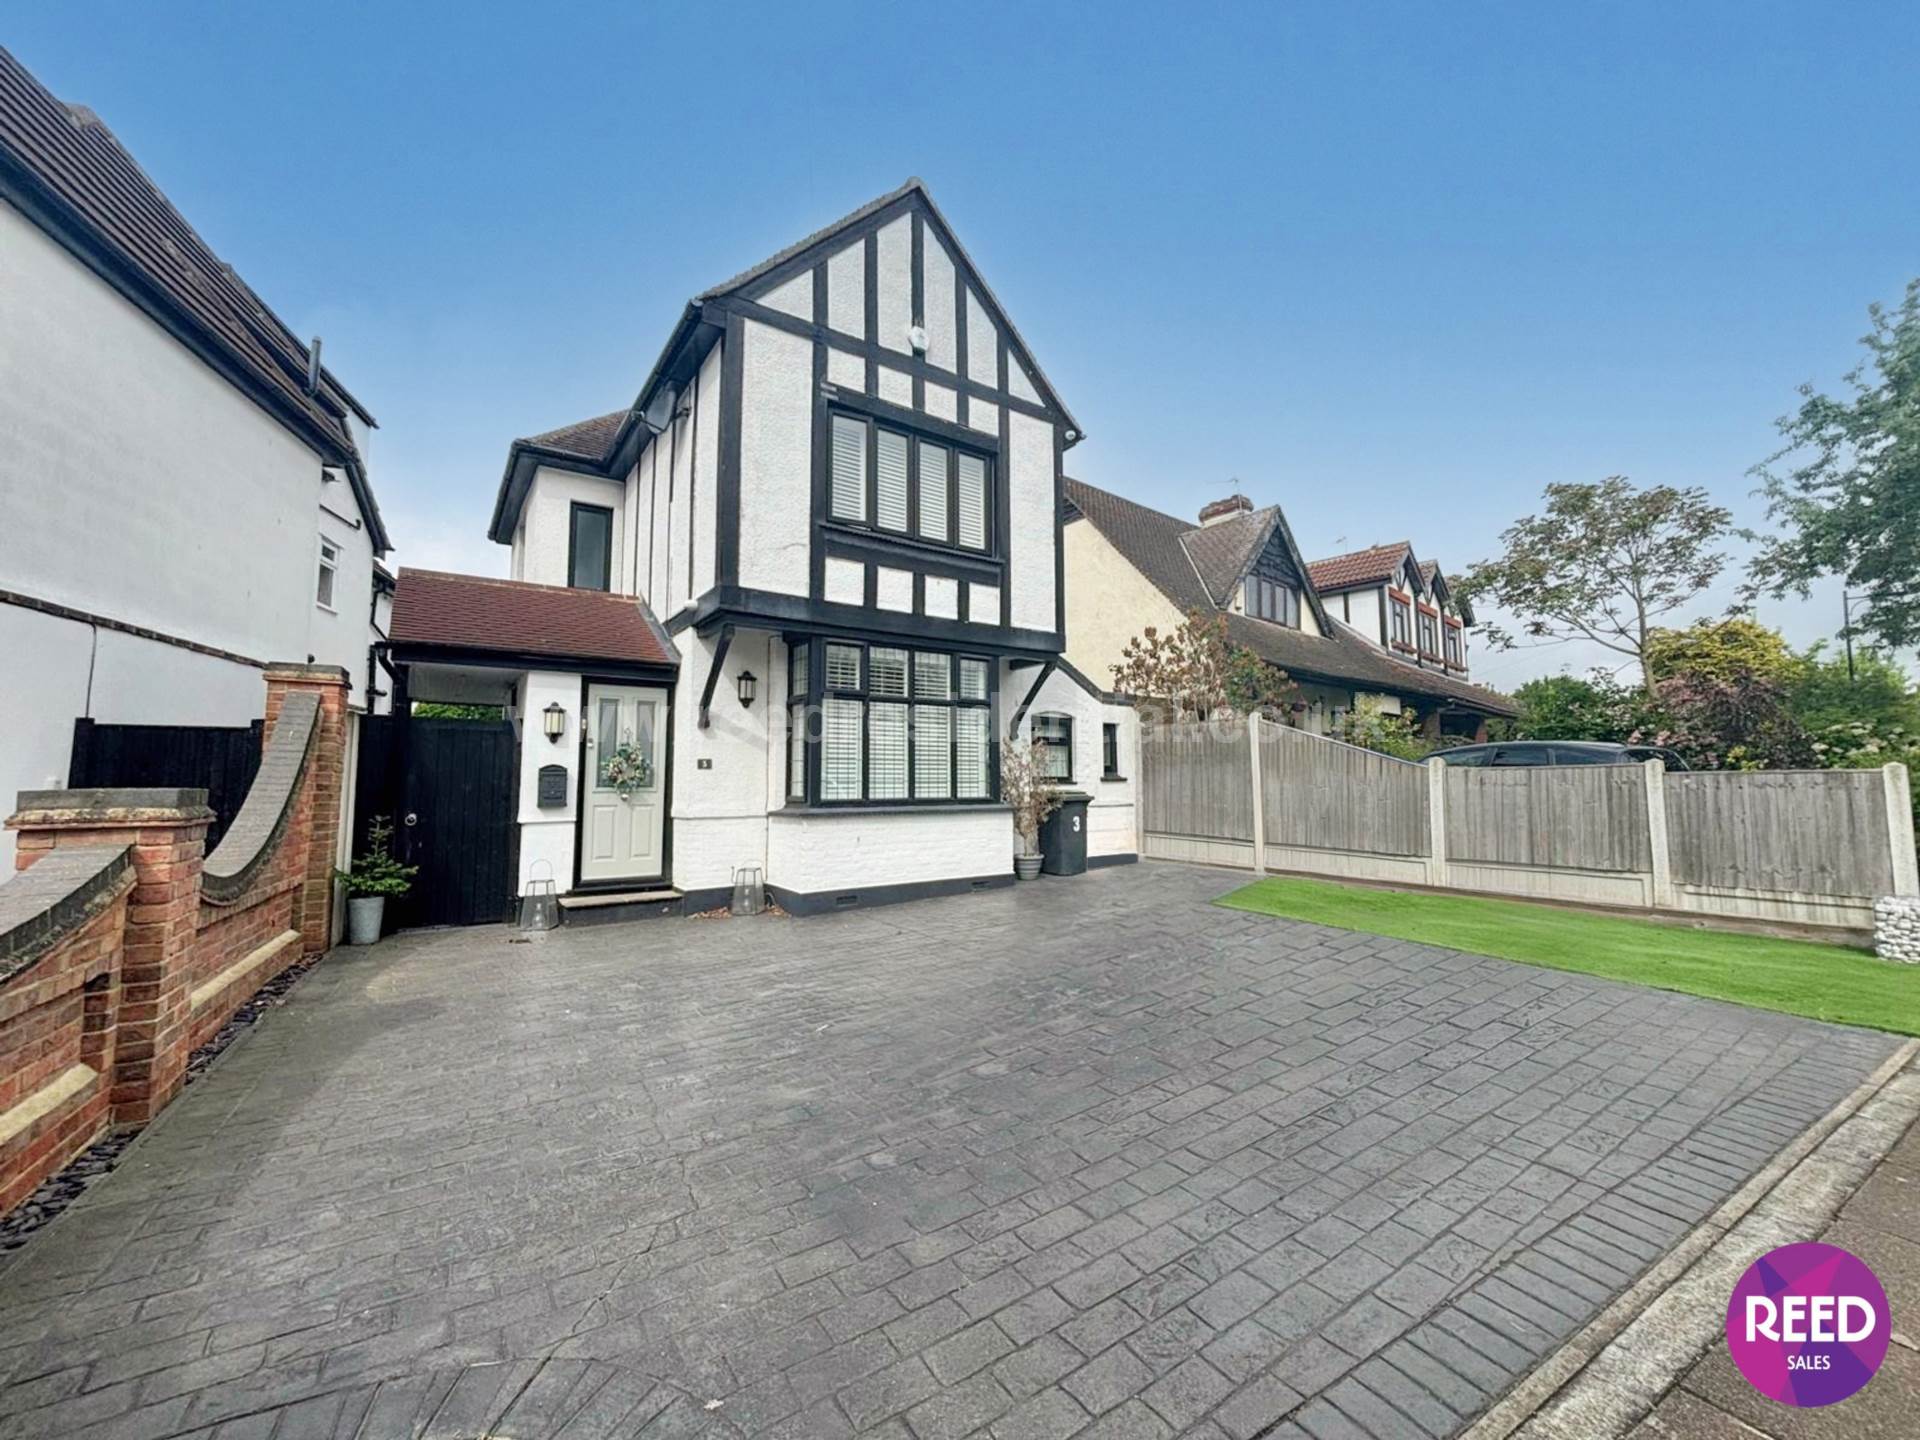 4 bed Detached House for rent in Westcliff On Sea. From Reed Residential - Westcliff on Sea